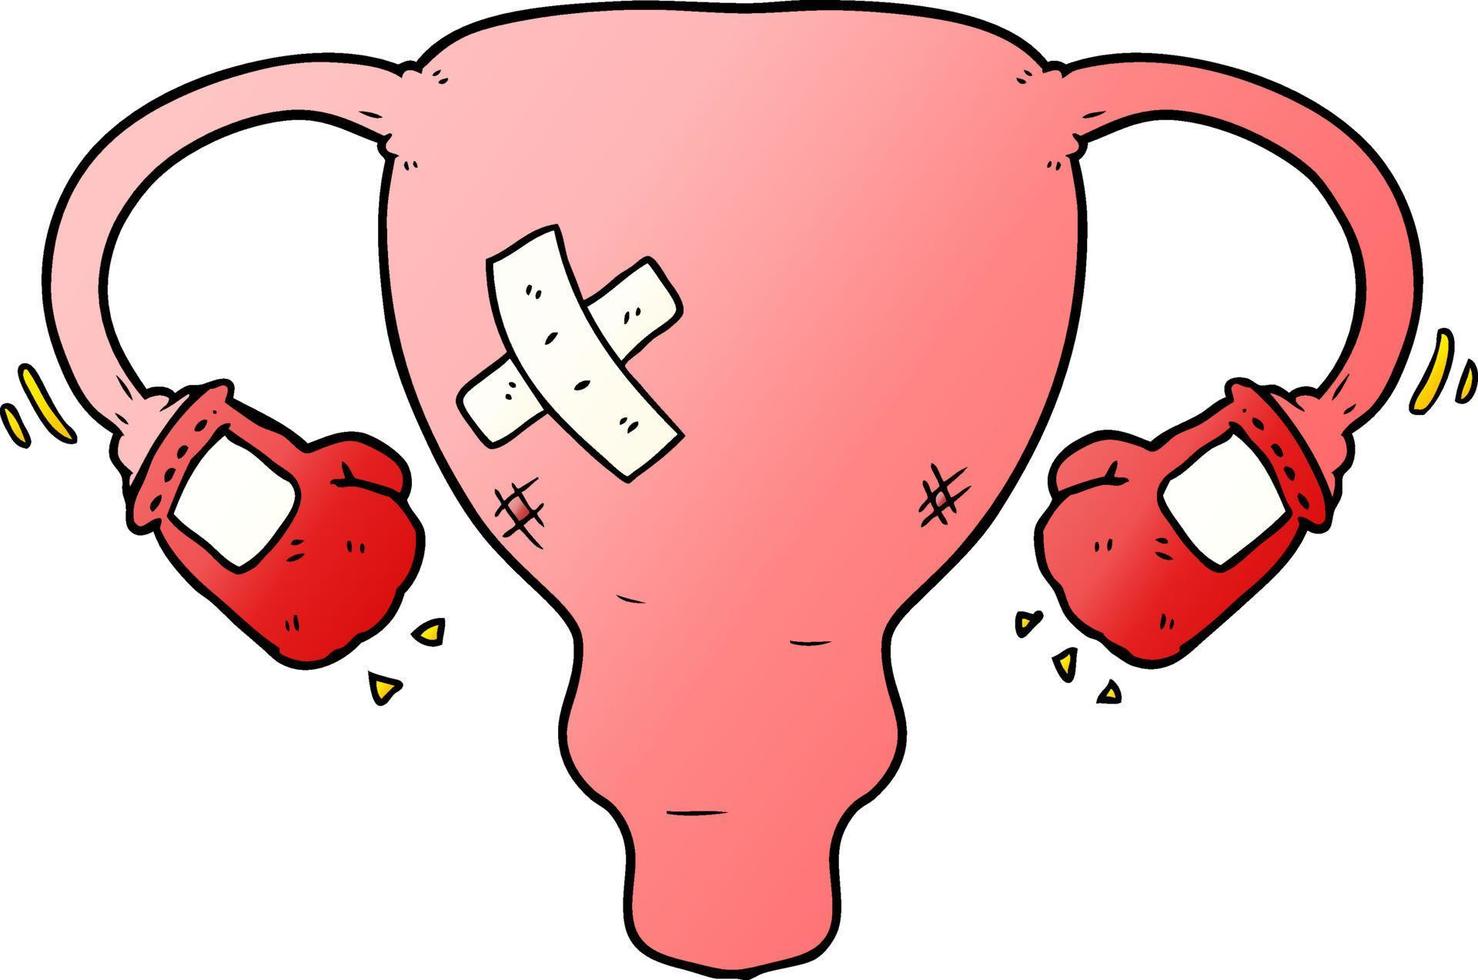 cartoon beat up uterus with boxing gloves vector